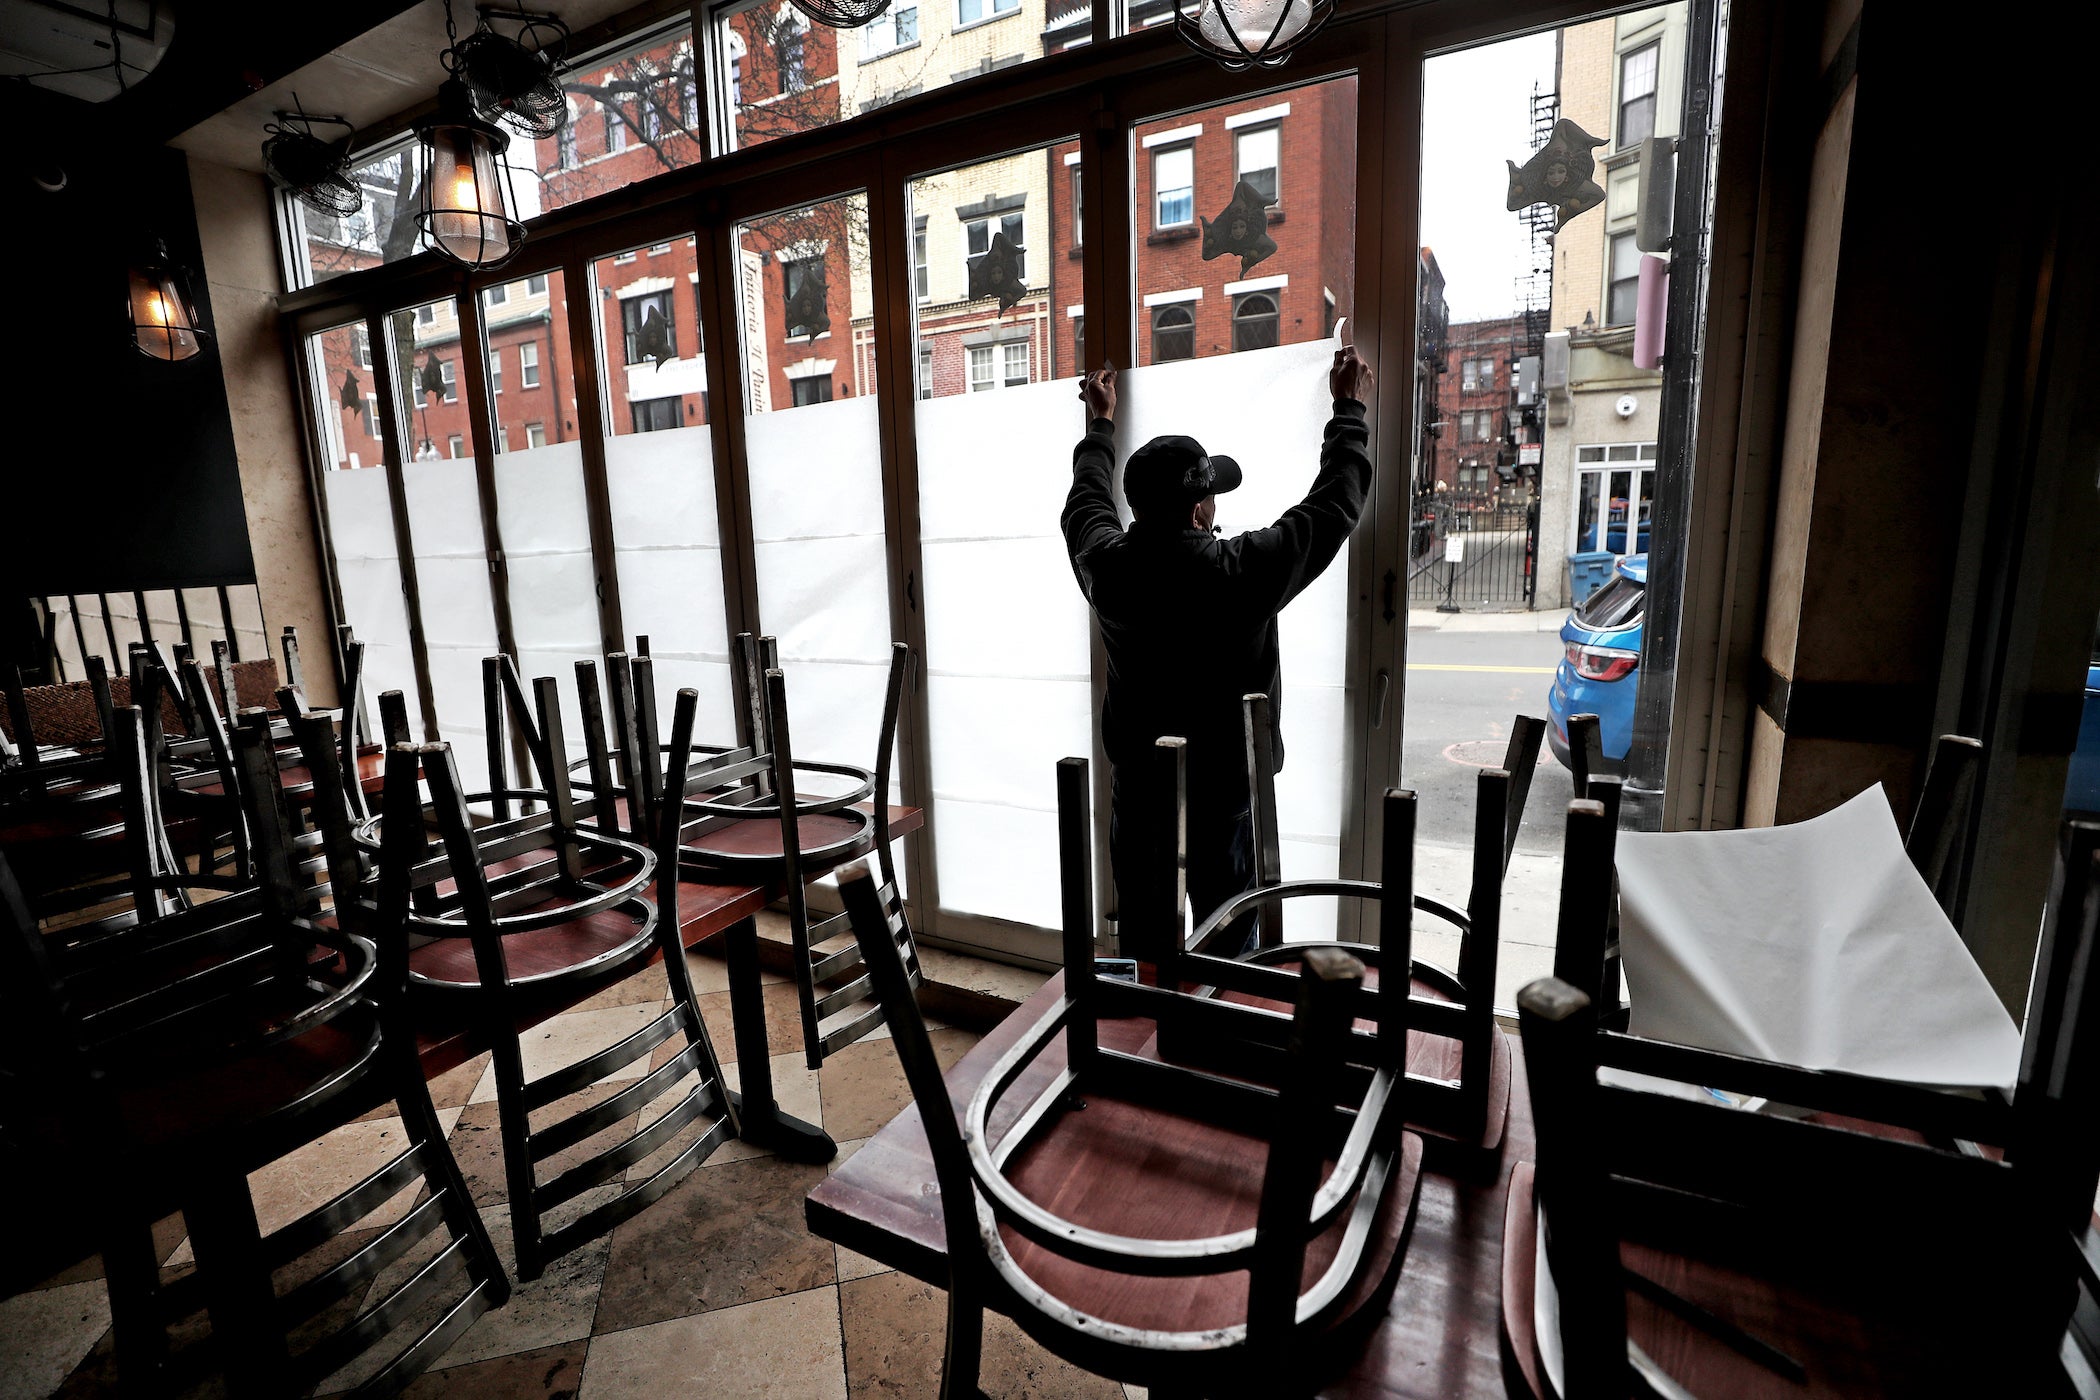 An employee of Carmelina's in the North End of Boston taped up paper in the windows of the restaurant, which temporarily closed during the coronavirus pandemic.